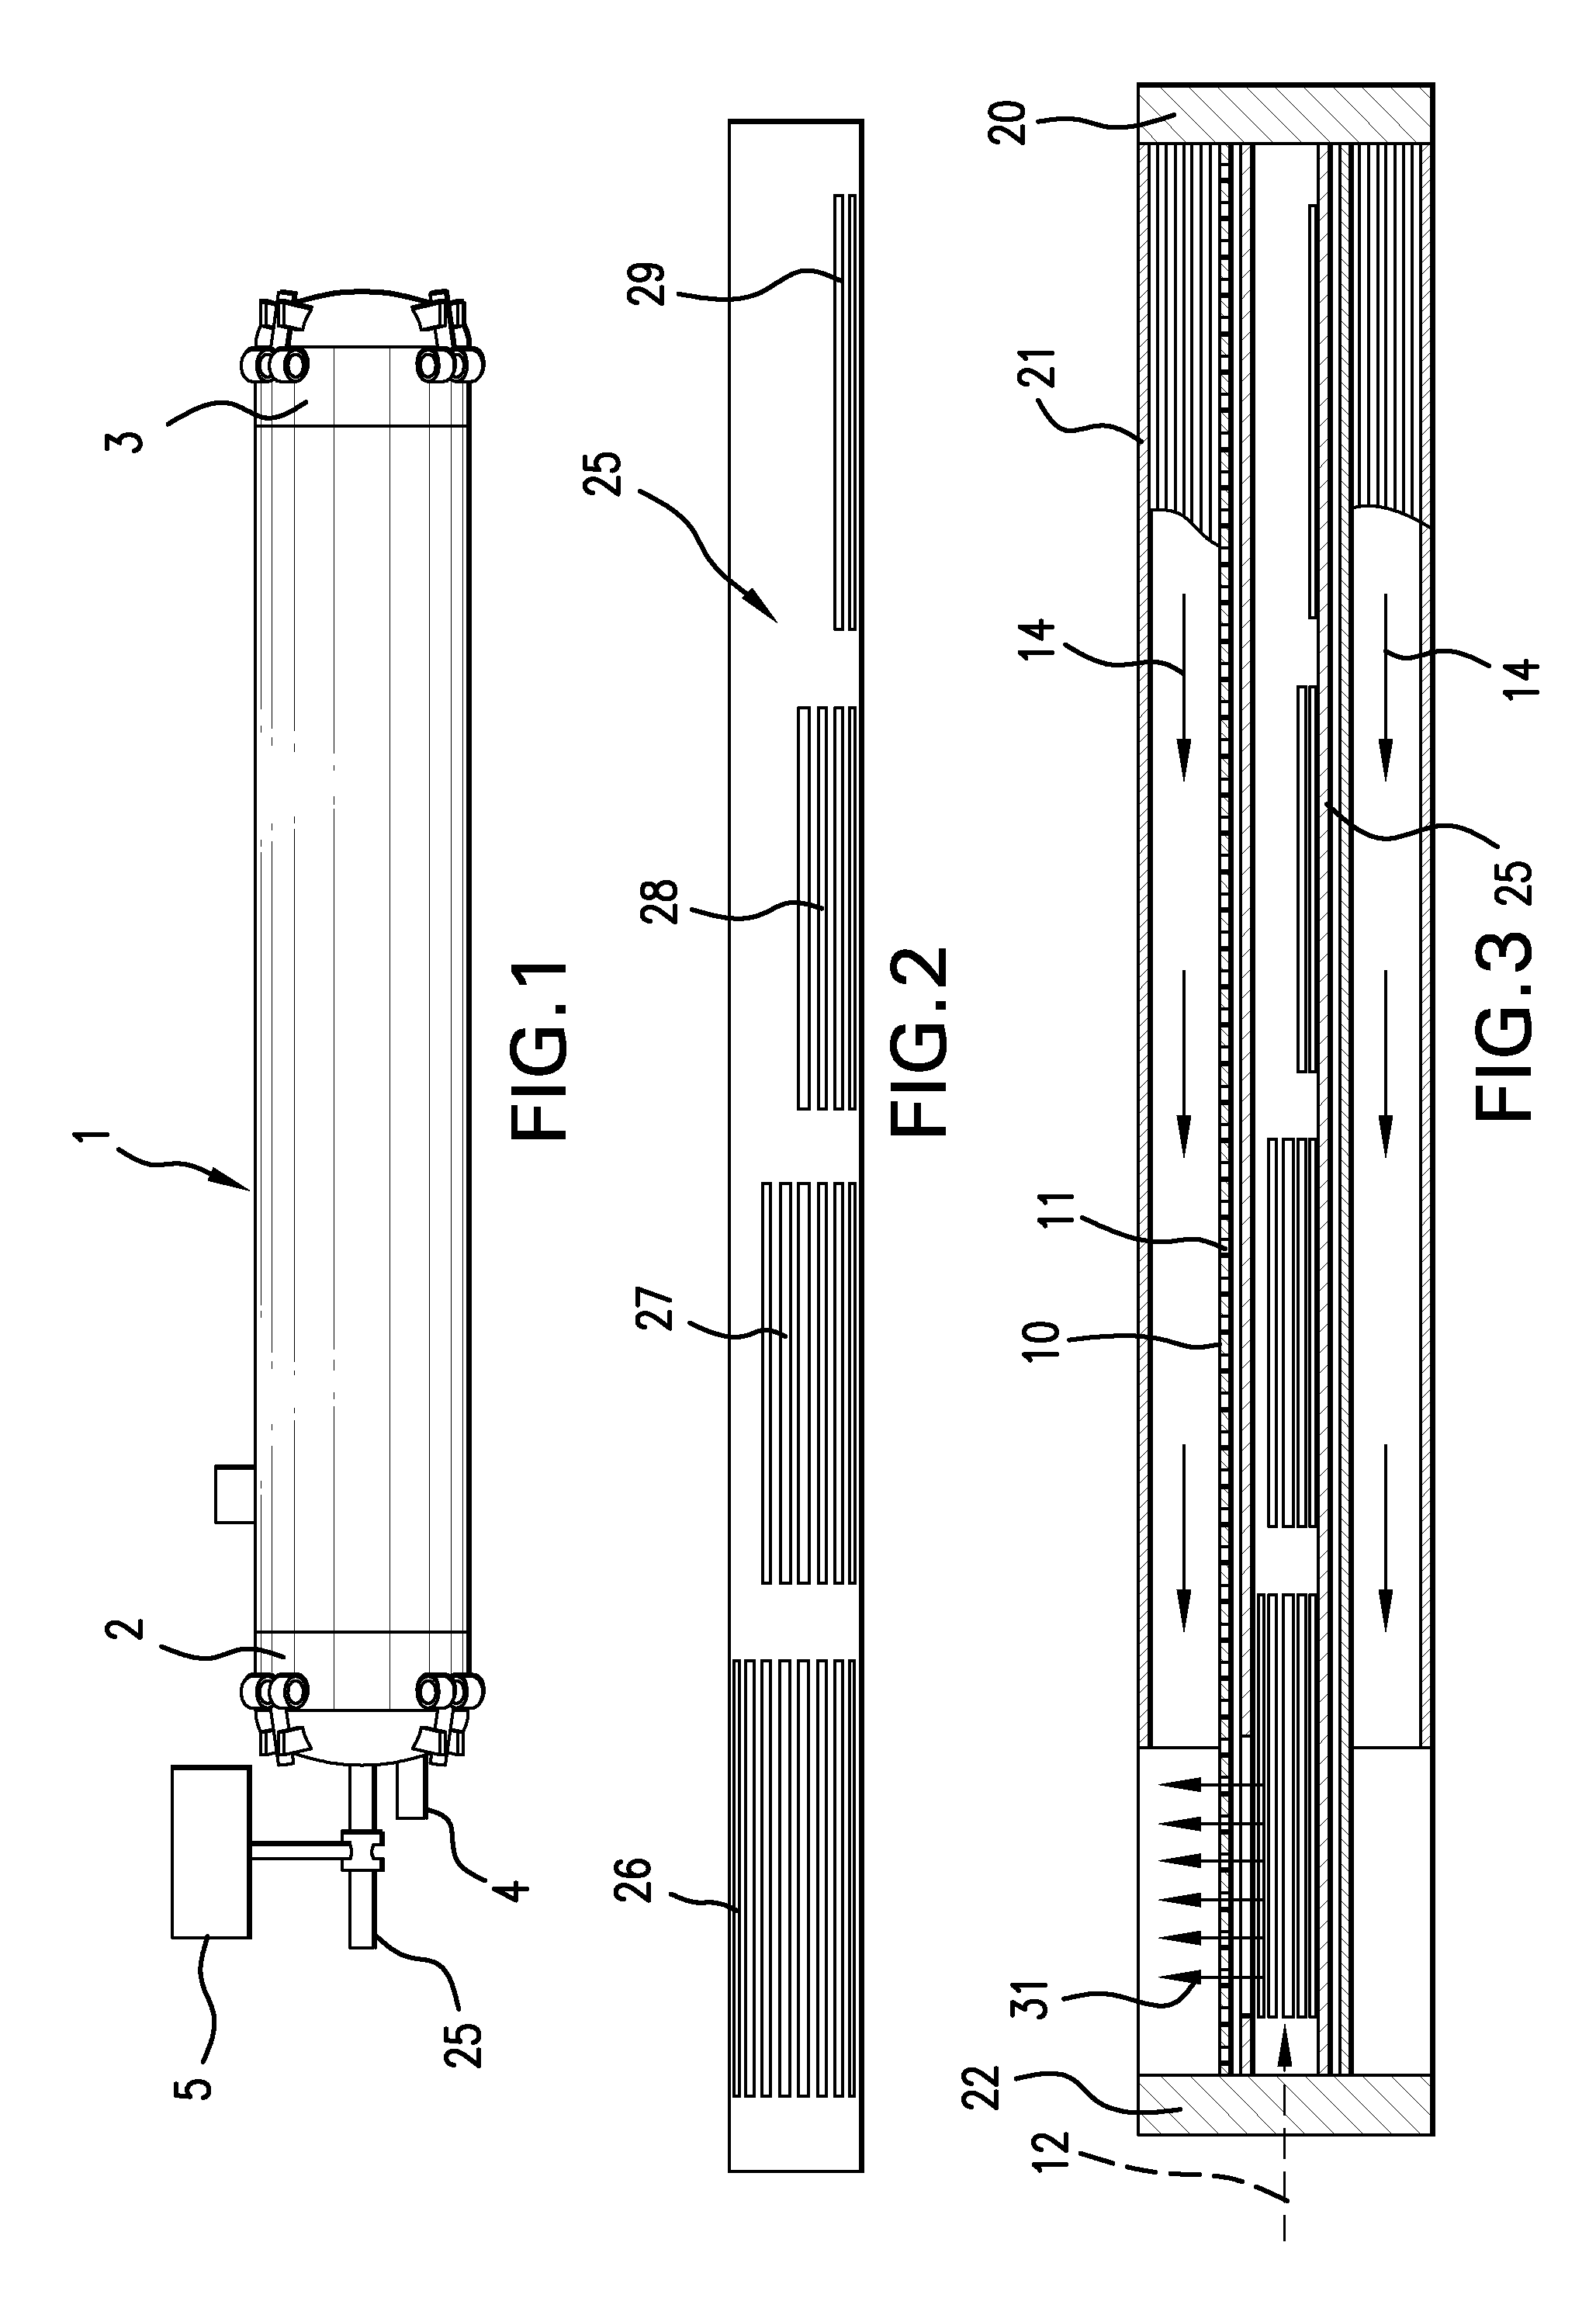 Air separation membrane module with variable sweep stream